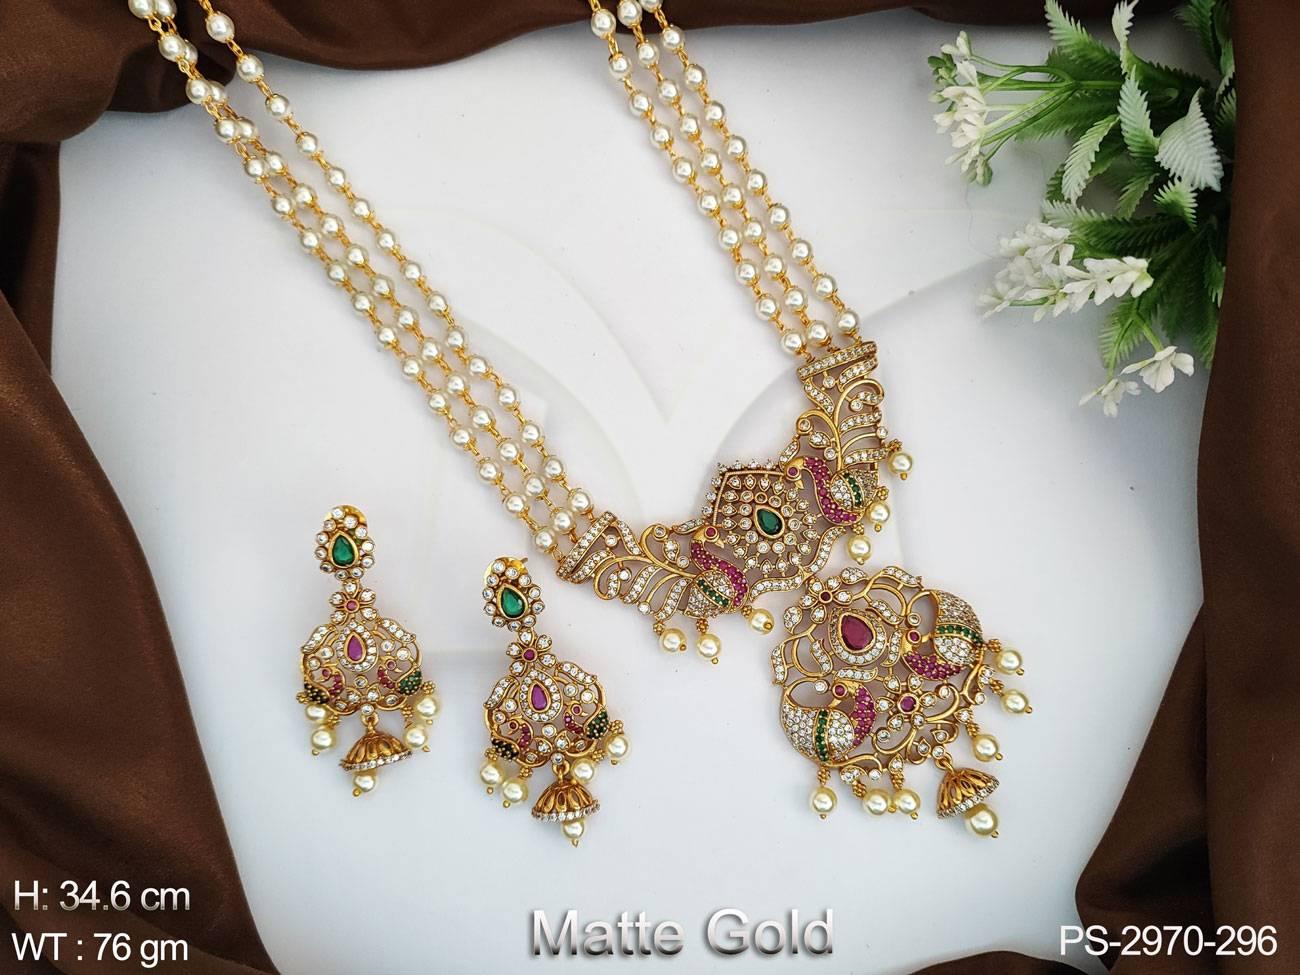 Crafted from matte gold with a fancy design, this pendant set will be sure to make any look shine.